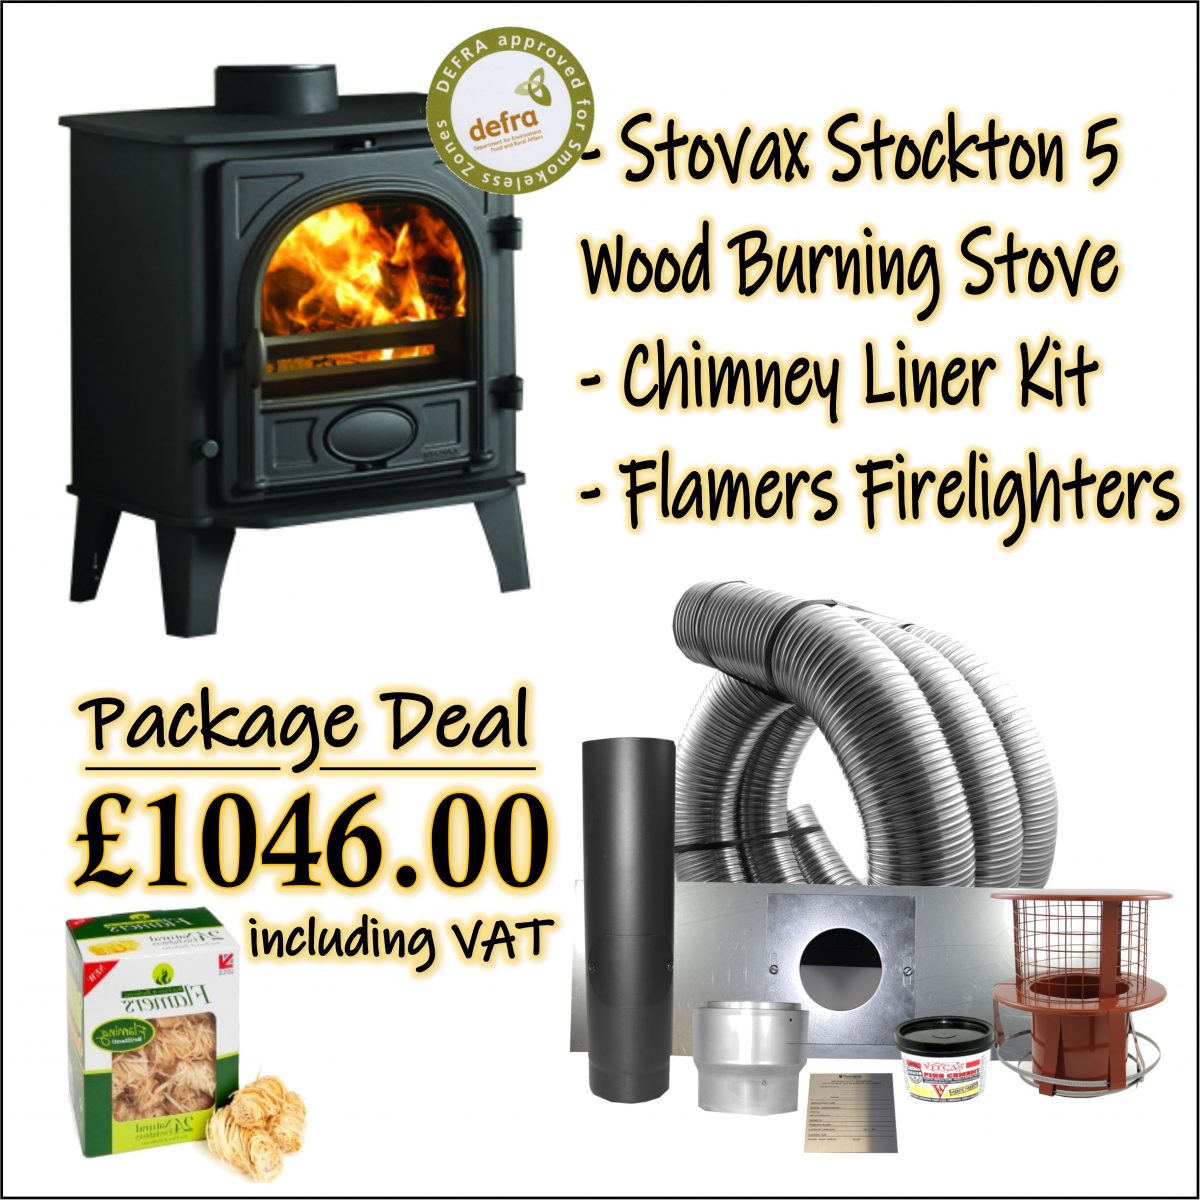 Stovax Stockton 5 Stove Package Deal